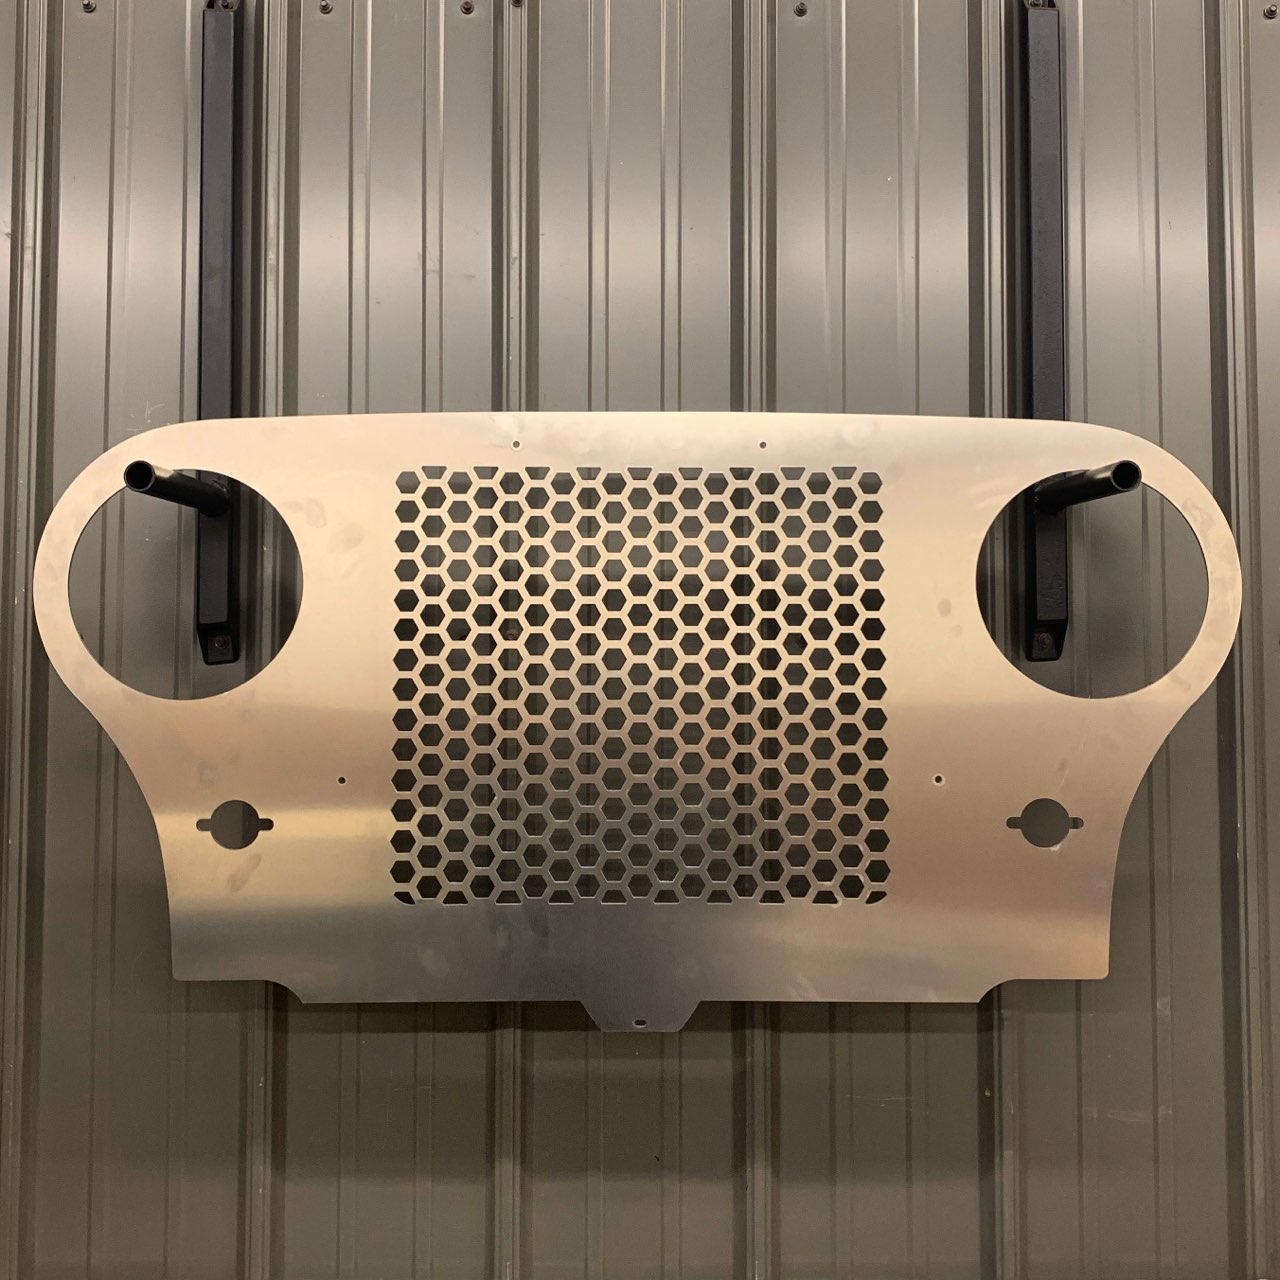 Product image for Roxor Honeycomb Grille